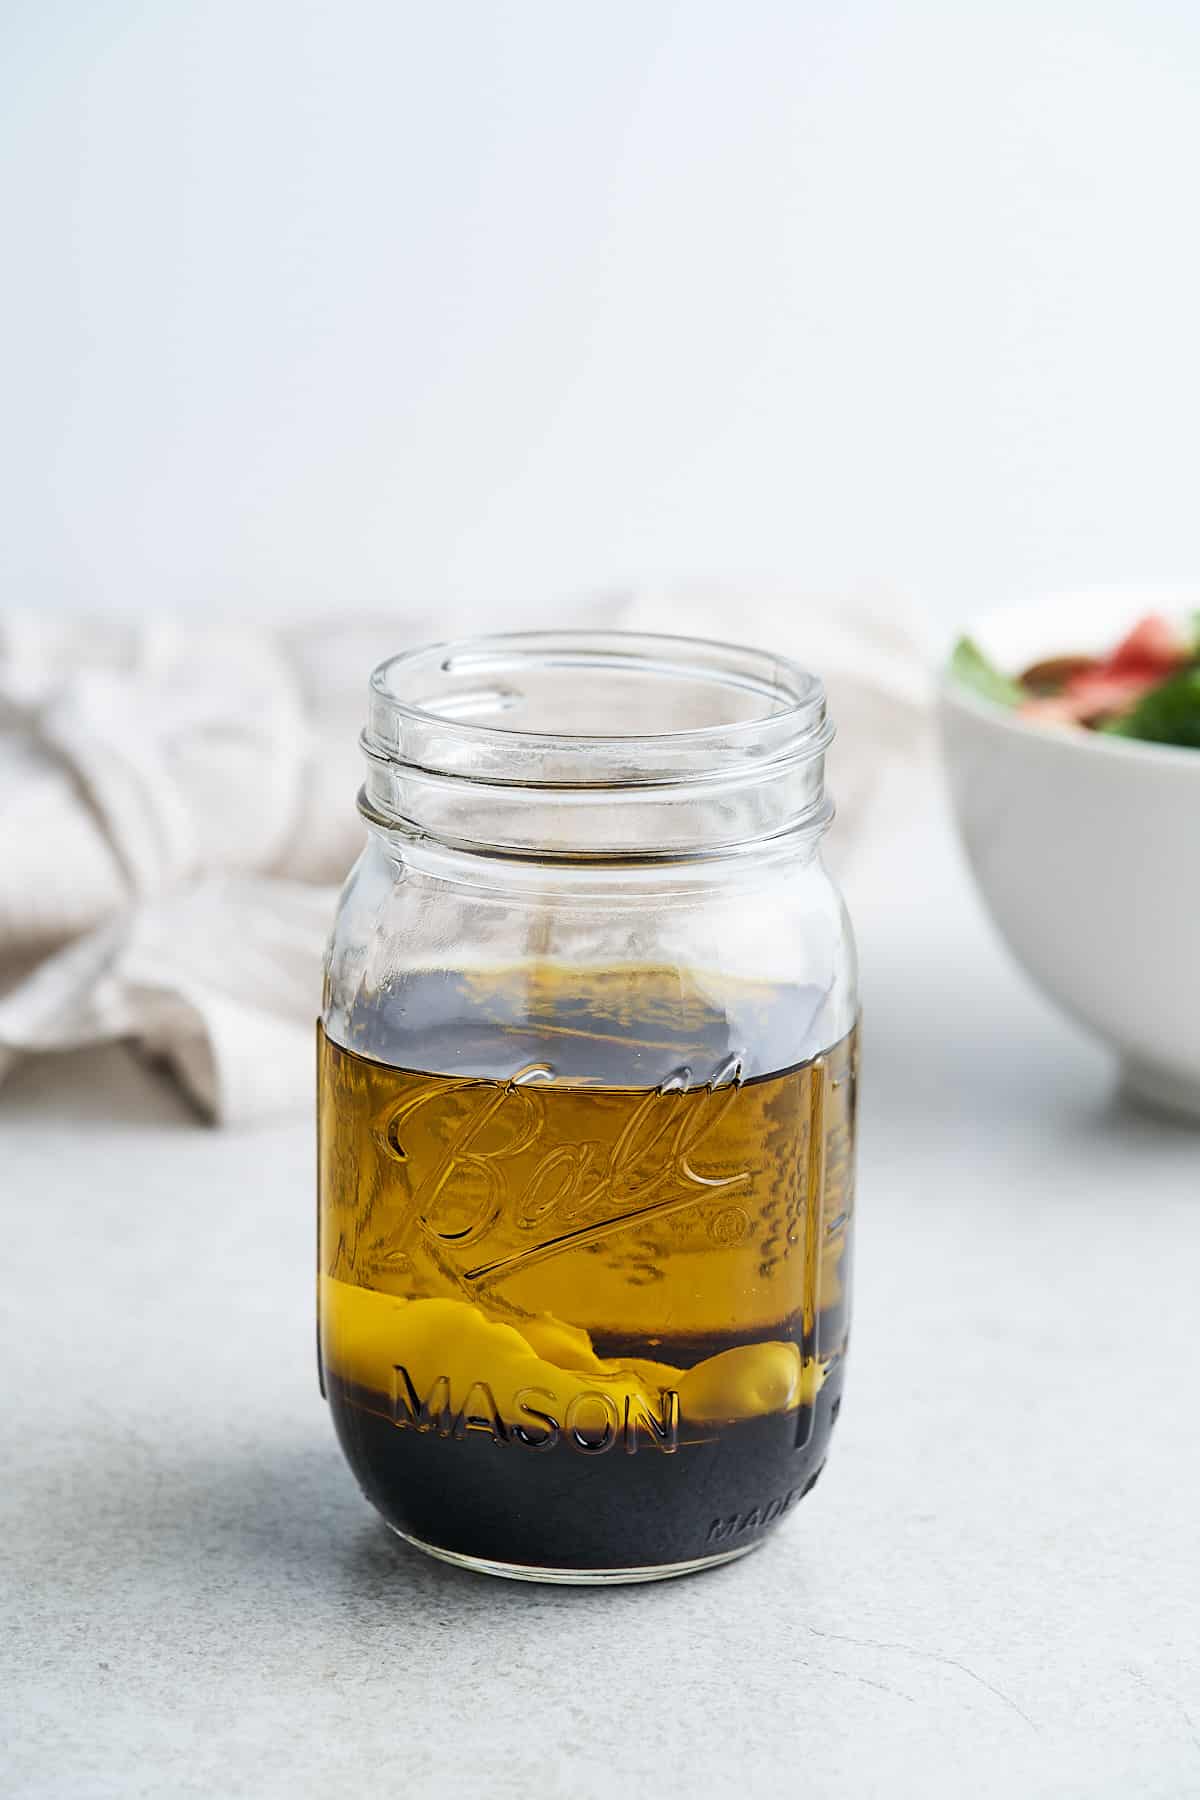 Olive oil, balsamic vinegar, and mayo in a jar.